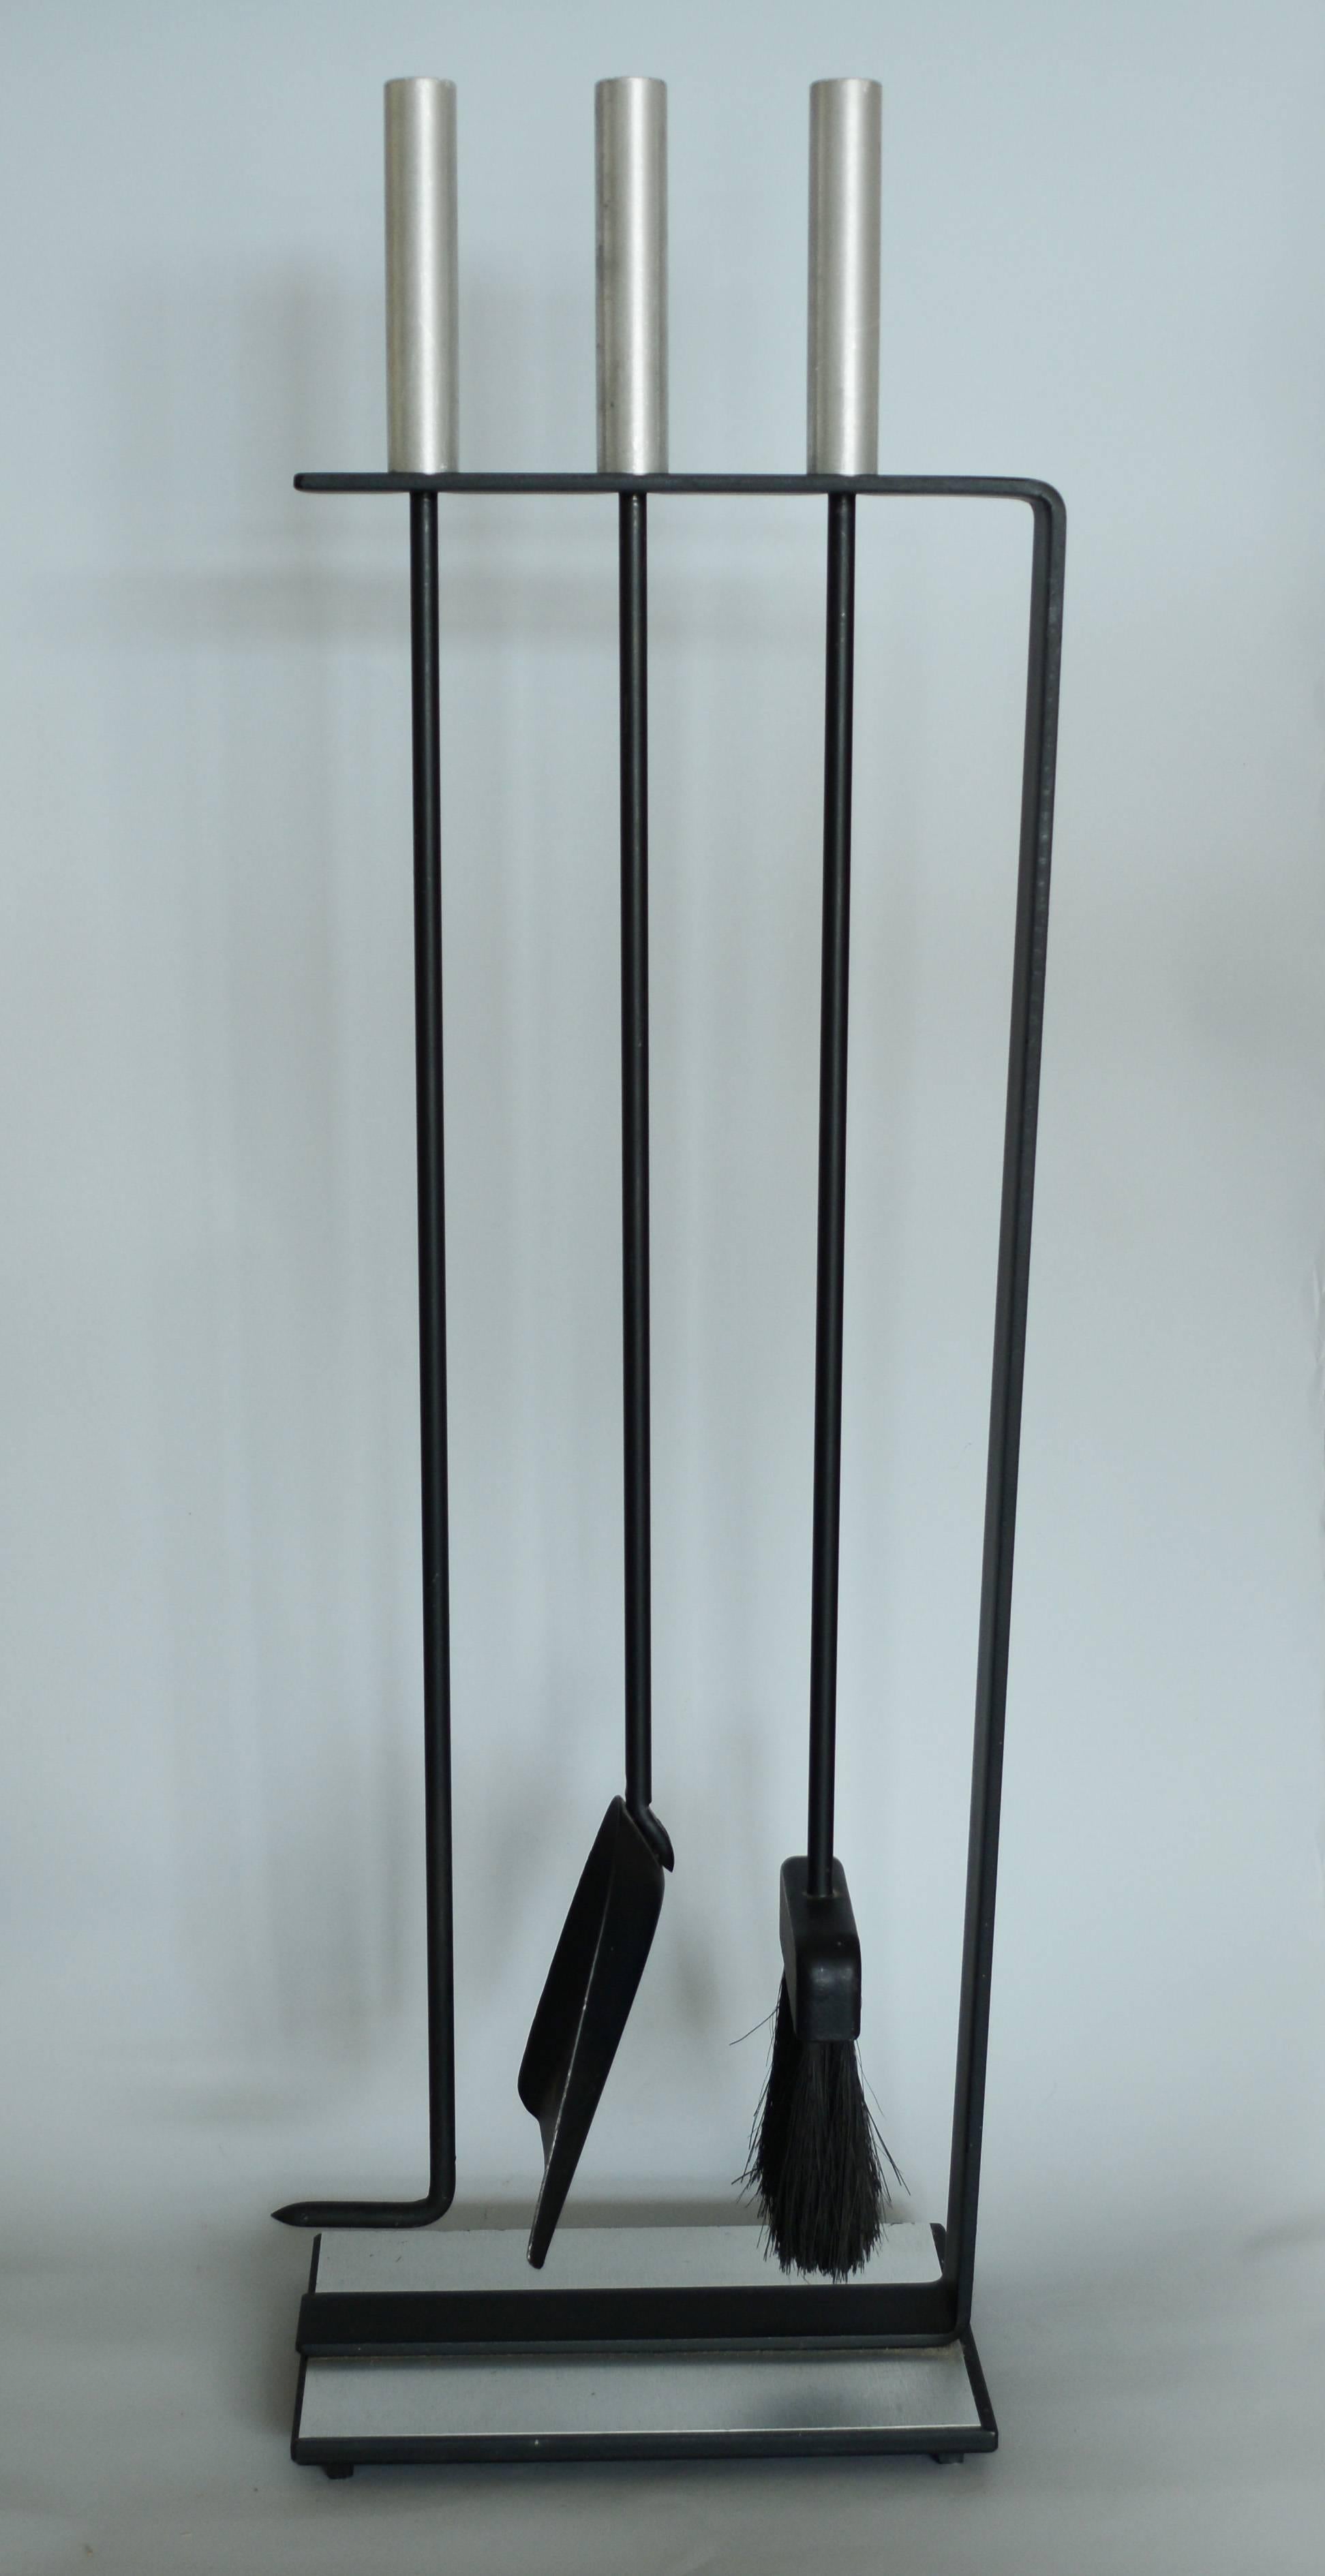 A Minimalist and clean lined set of fireplace tools by Pilgrim. These feature aluminum handles and a sheet of aluminum on the base. The set consist of a poker, dust pan and broom.